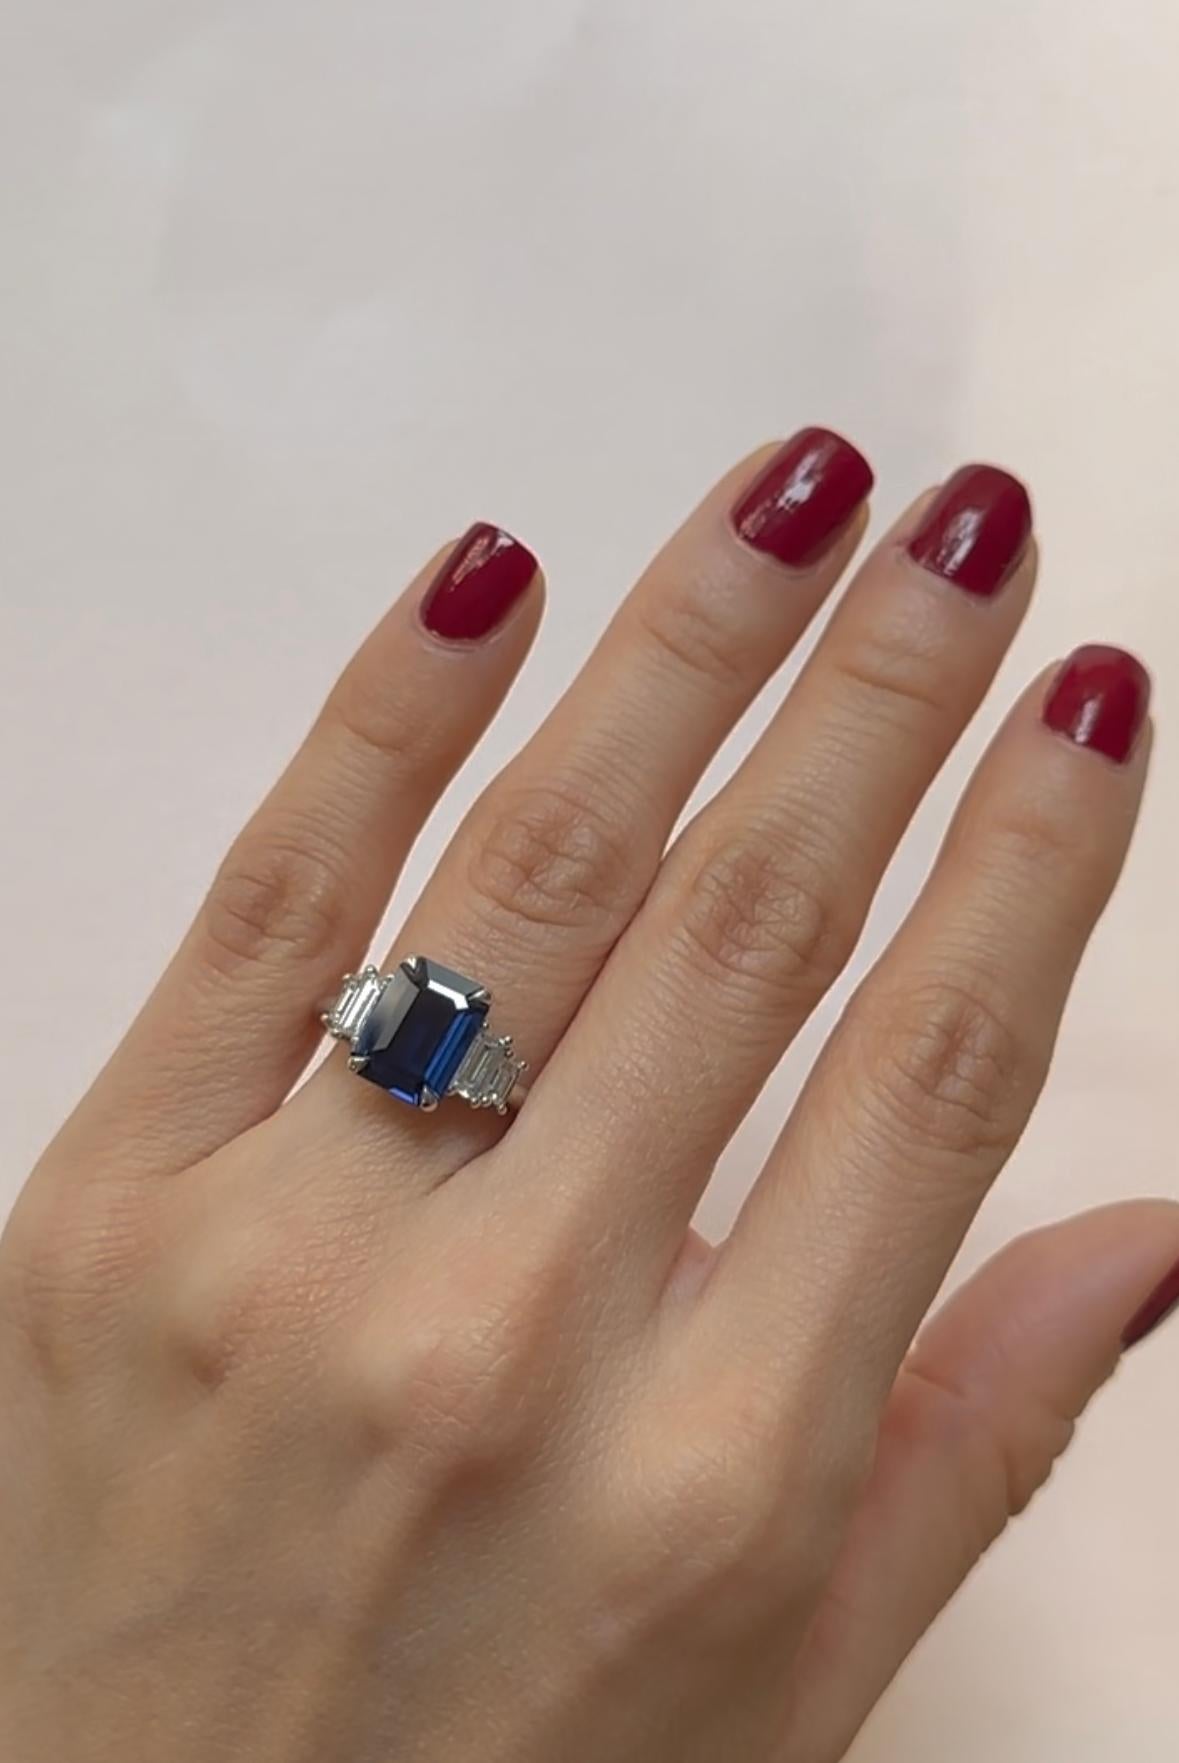 For Sale:  Art Deco Style 18k White Gold Ring With 2.65 Ct Royal Blue Emerald Cut Sapphire 5